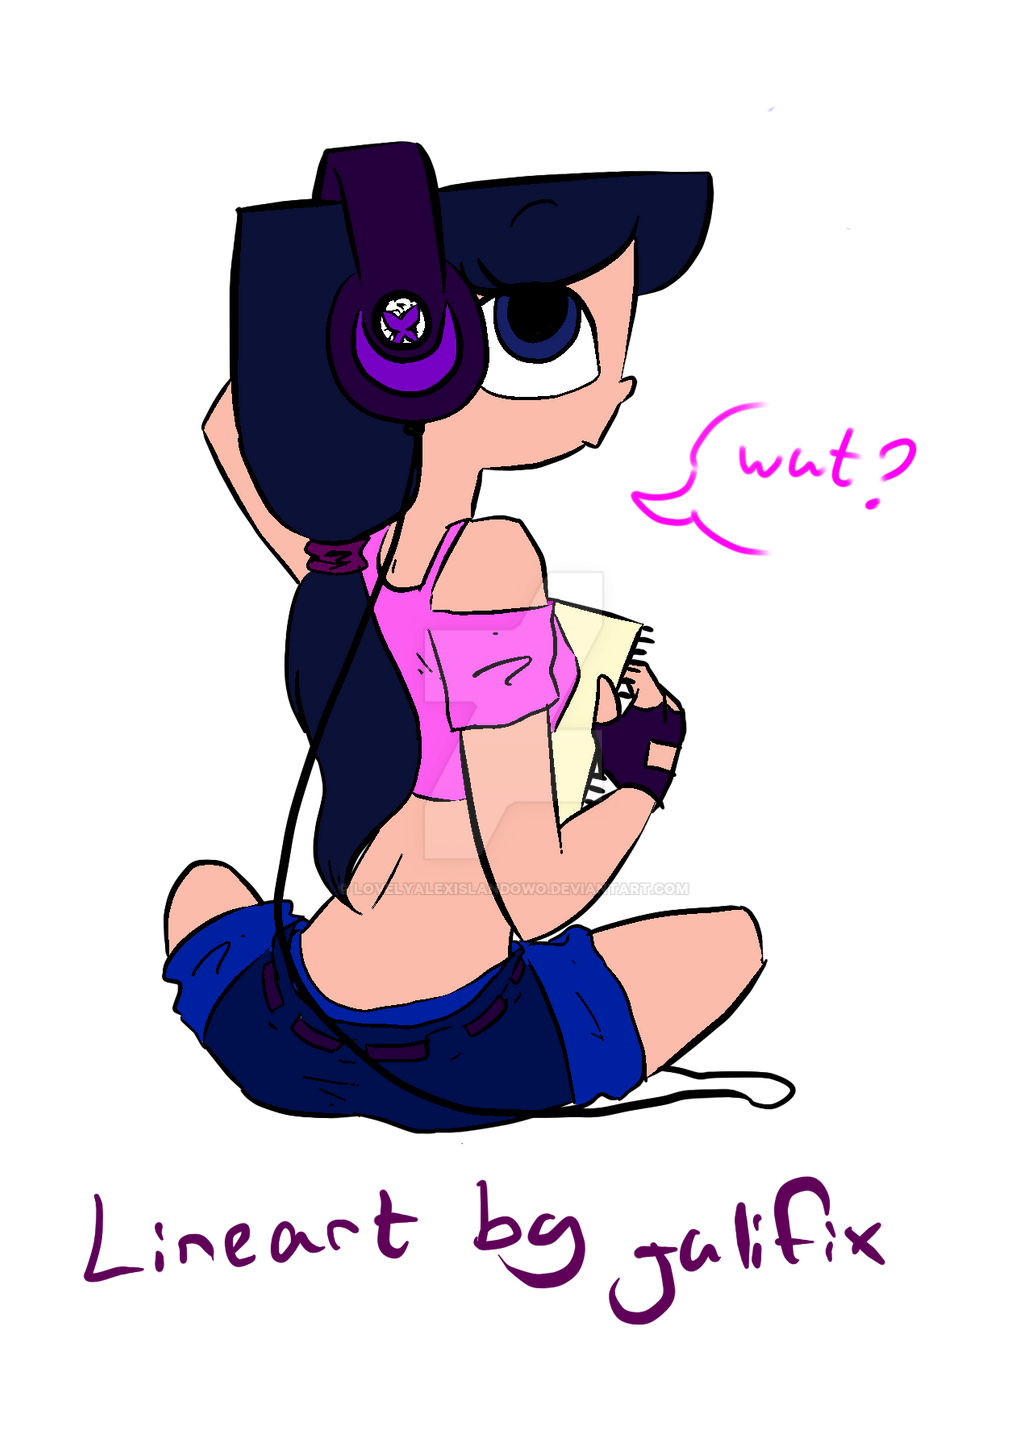 Izzy - Wut? (Colored)